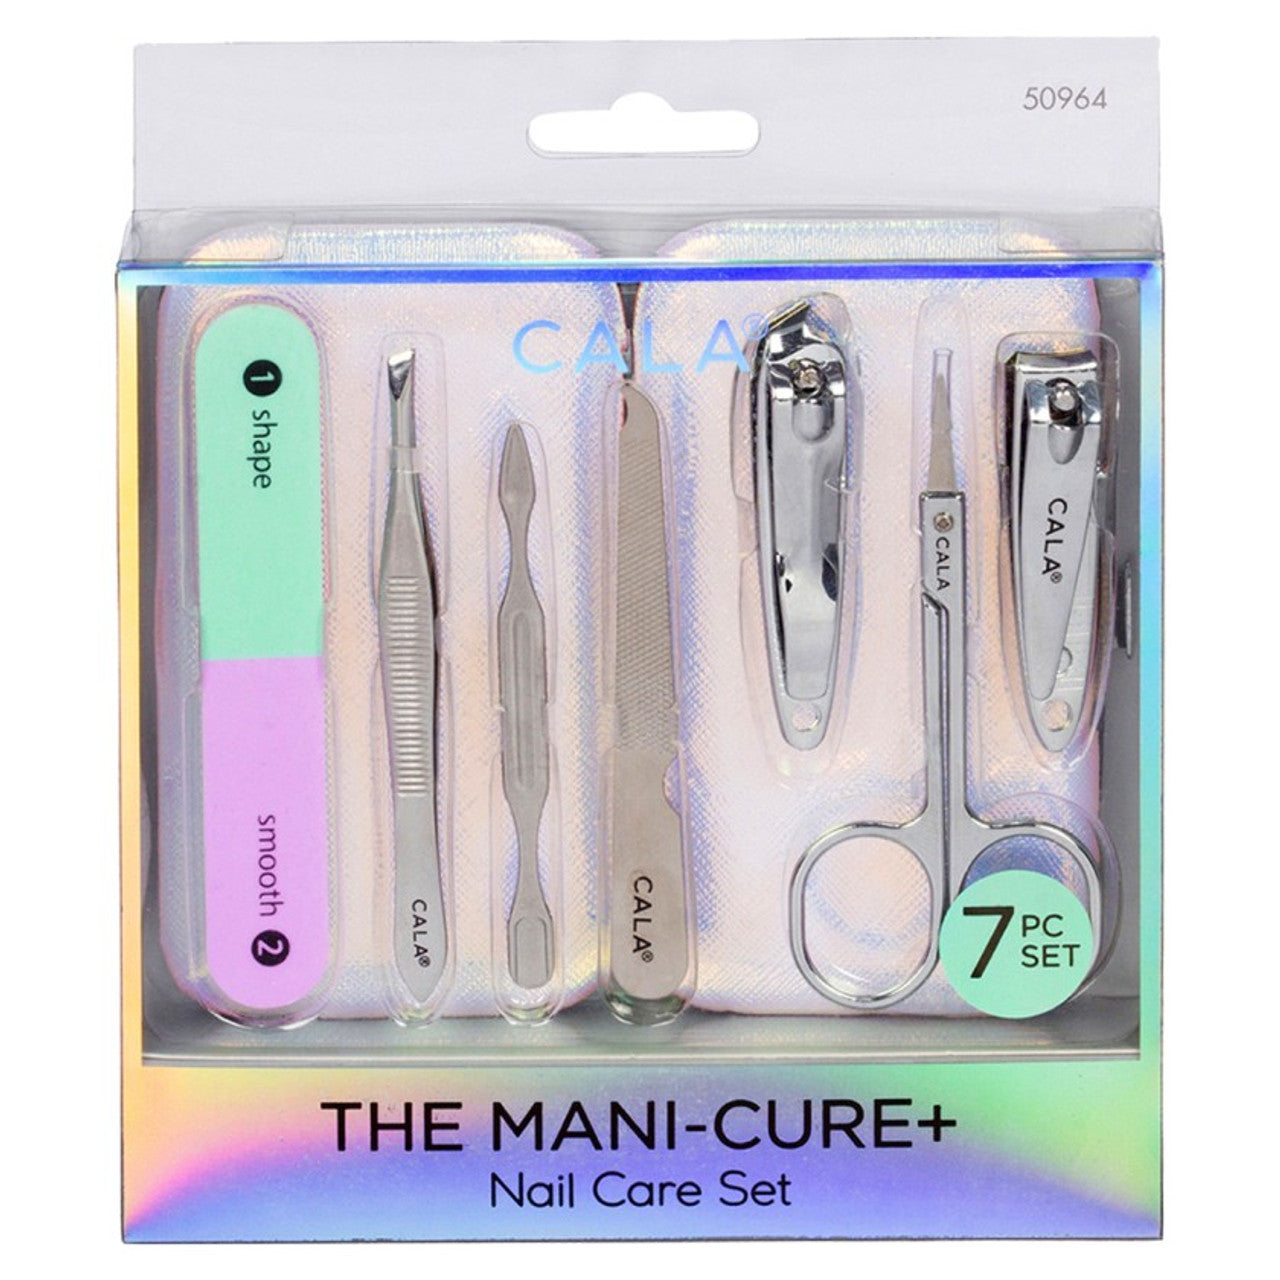 The Mani-Cure + Nail Care 7 Piece Set